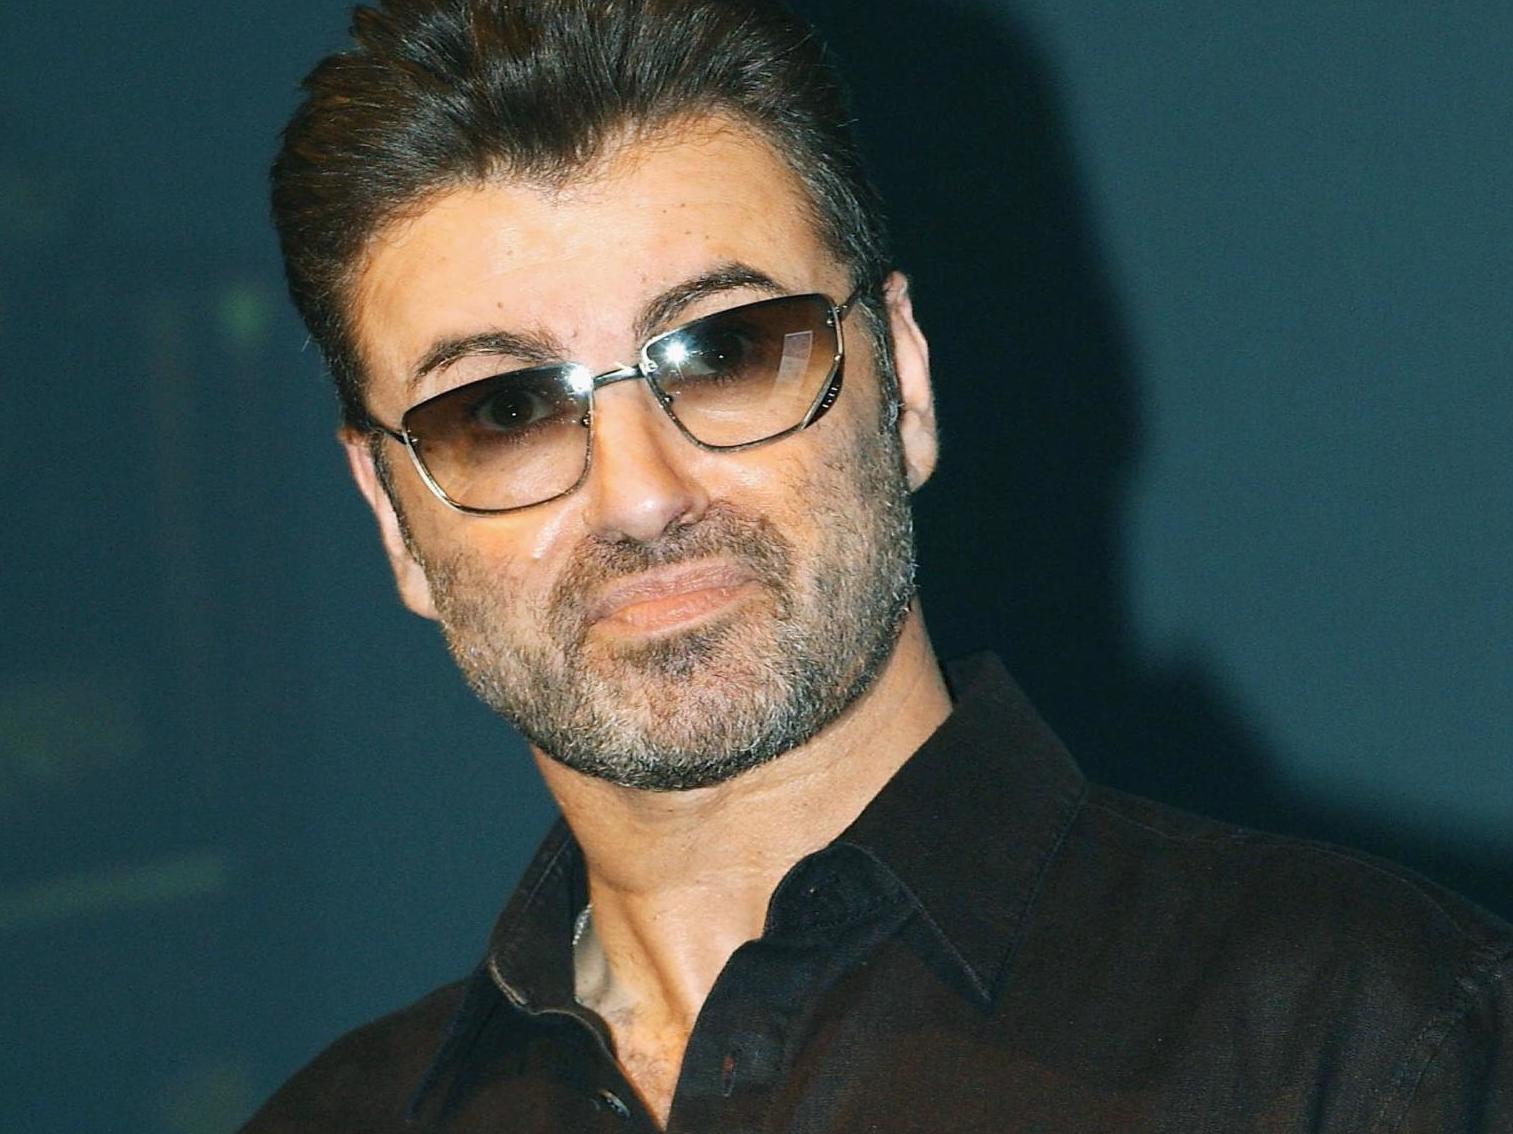 In scandal George Michael turned out to be completely revealingly human  George  Michael  The Guardian